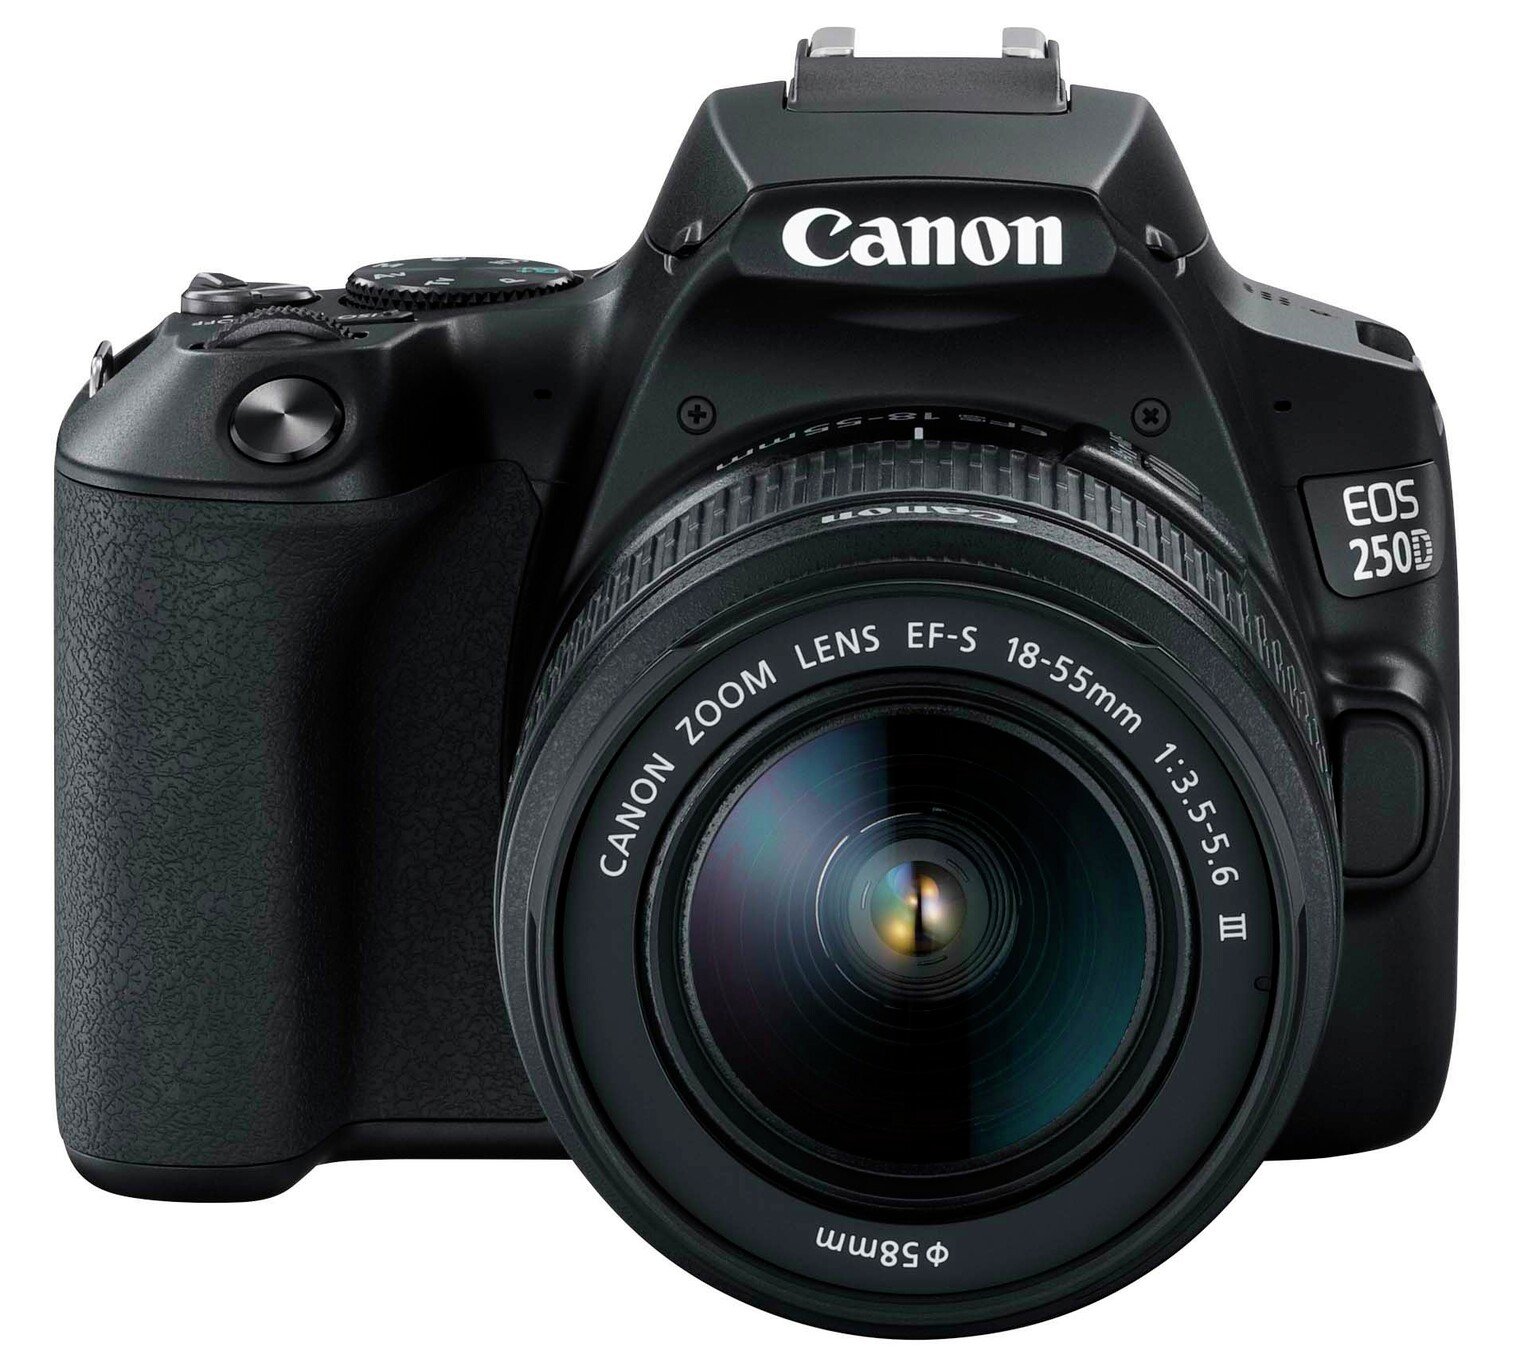 Canon EOS 250D DSLR Camera Body with 18-55mm DC Lens